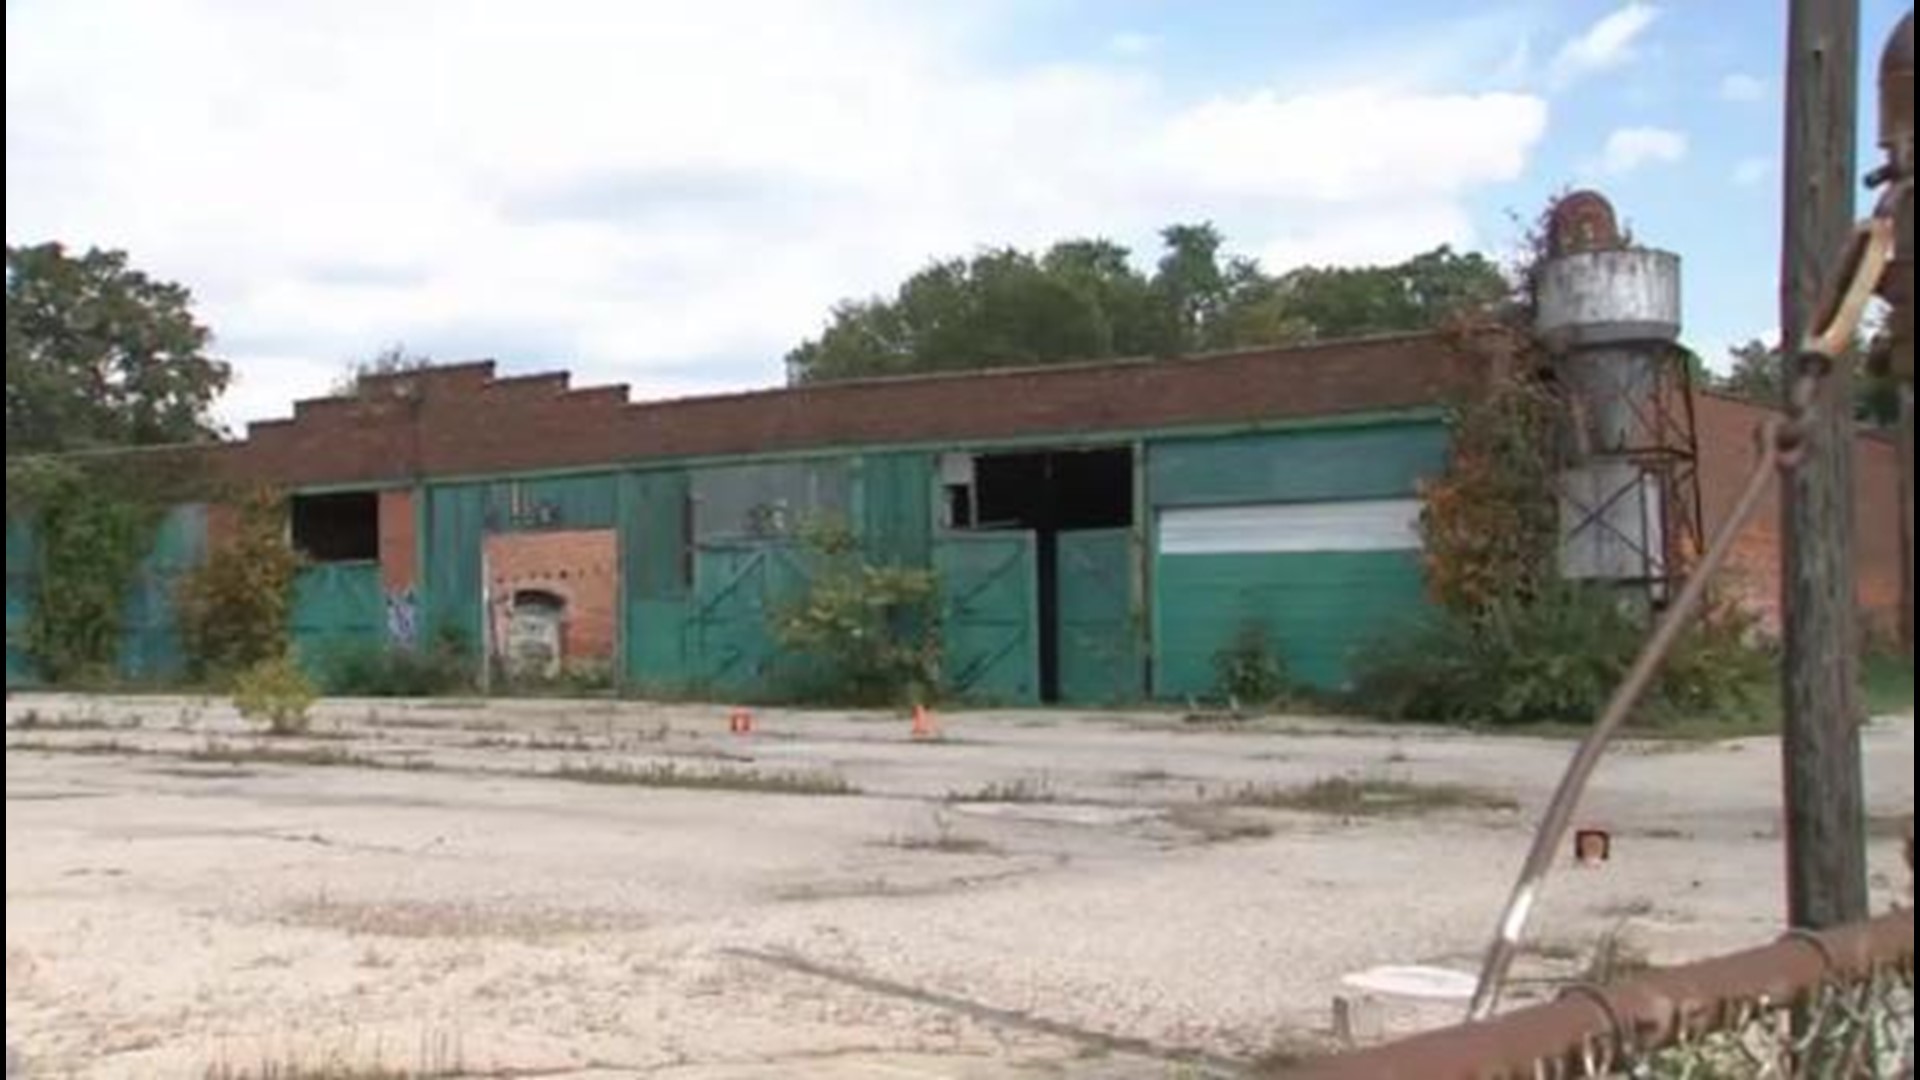 Judge Orders Owner Of Franklin Park Trolley Barn To Clean It Up Or Pay